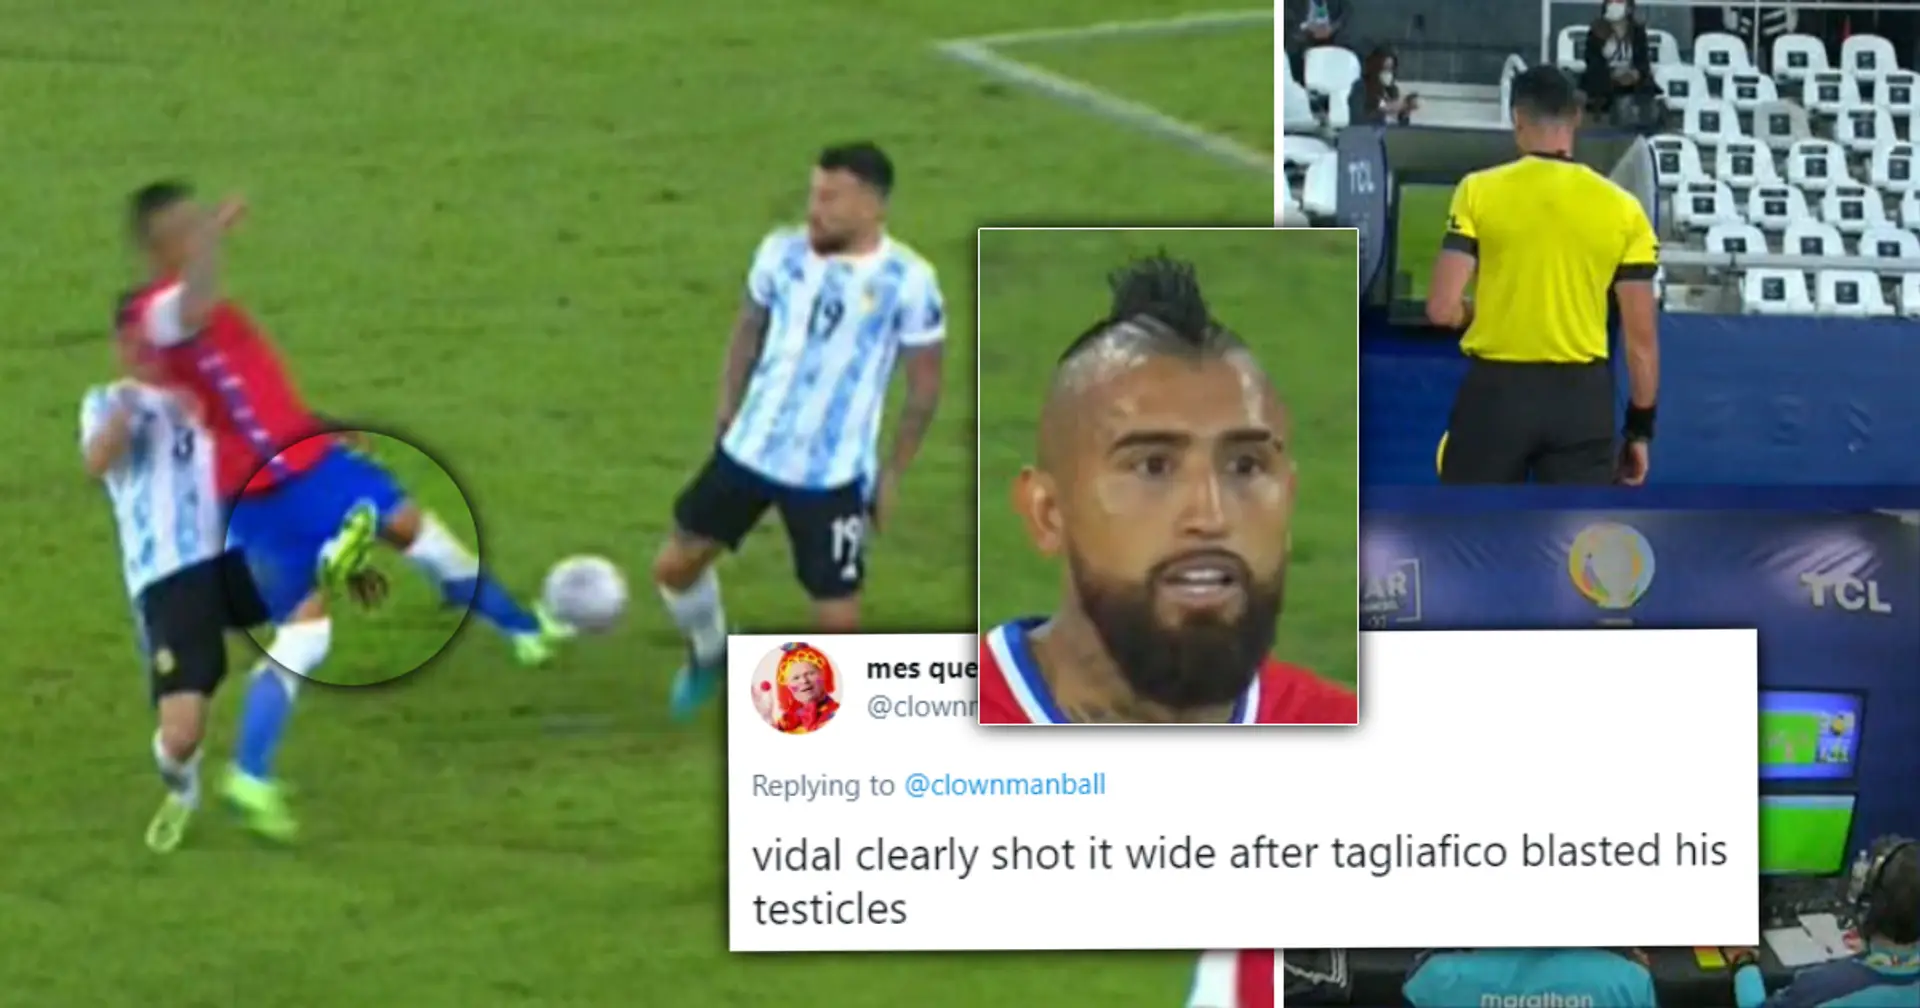 'He almost turns Vidal into a eunuch and Argentina fans still say it's not a pen': Awkward tackle in Argentina v Chile causes much debate – and jokes